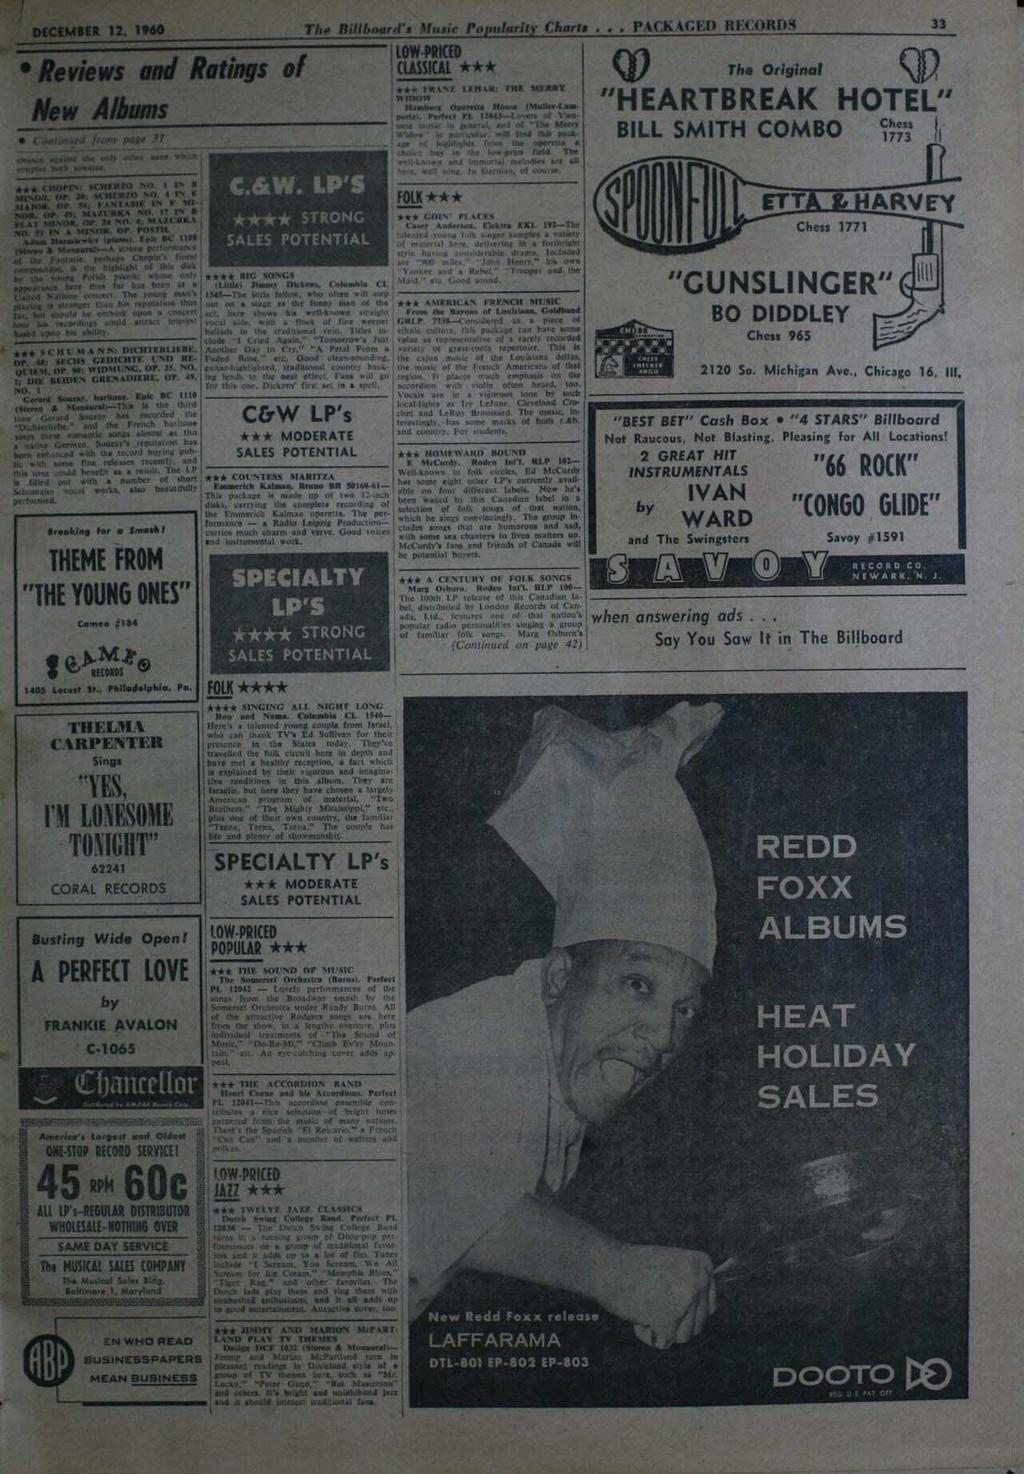 DECEMBER 12. 1960 The Rillboard'g Popularity Charte... PACKAGED RECORDS 33 Reviews and Ratings of New Albums t,.afglued /ruin parr JI tarisse Matent eba tub Miser tome wbkb cool. MM MIMAI.